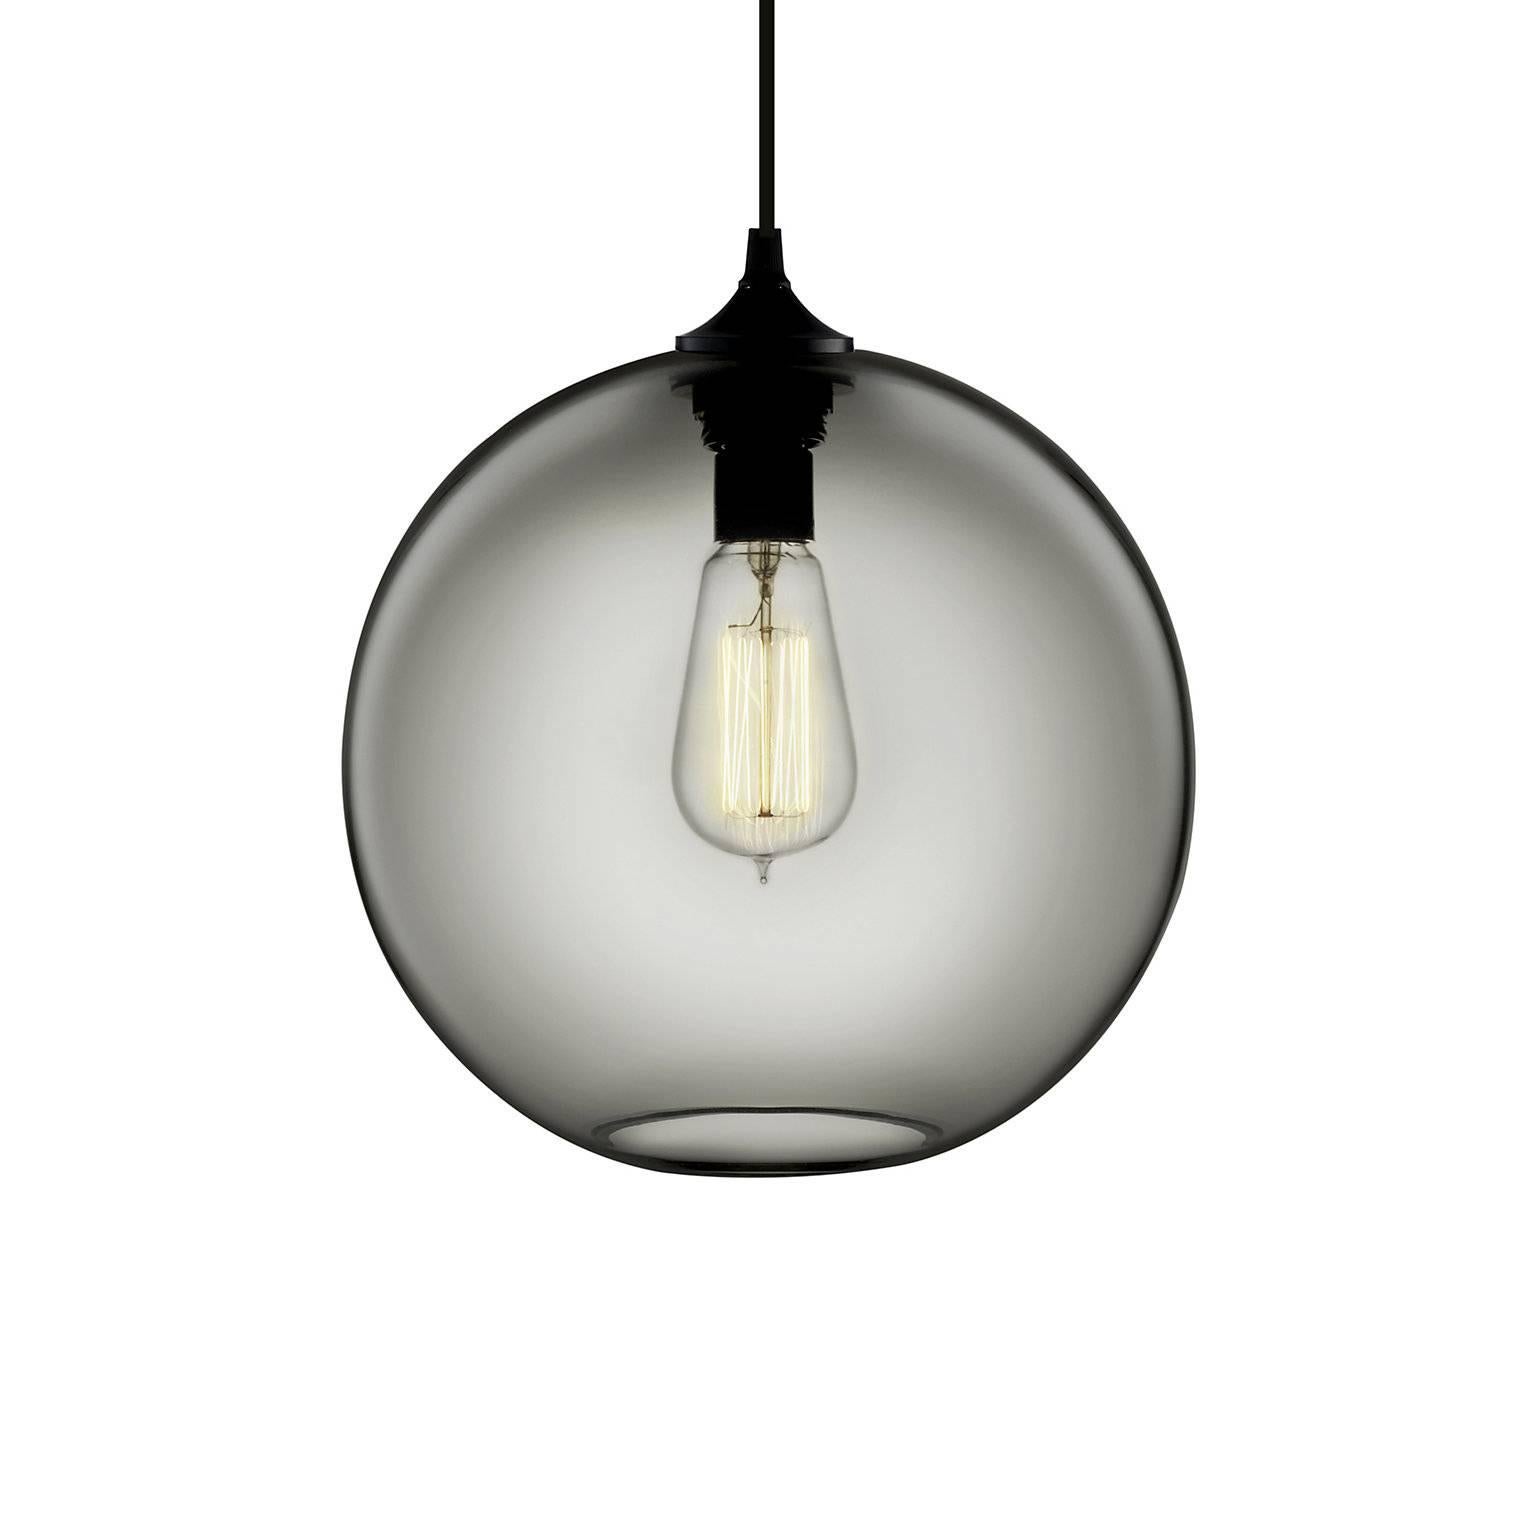 The Edison bulb at the centre of the signature Solitaire pendant and the cylindrical shape of the glass body harmonize to accentuate enduring quality and beauty. Every single glass pendant light that comes from Niche is handblown by real human